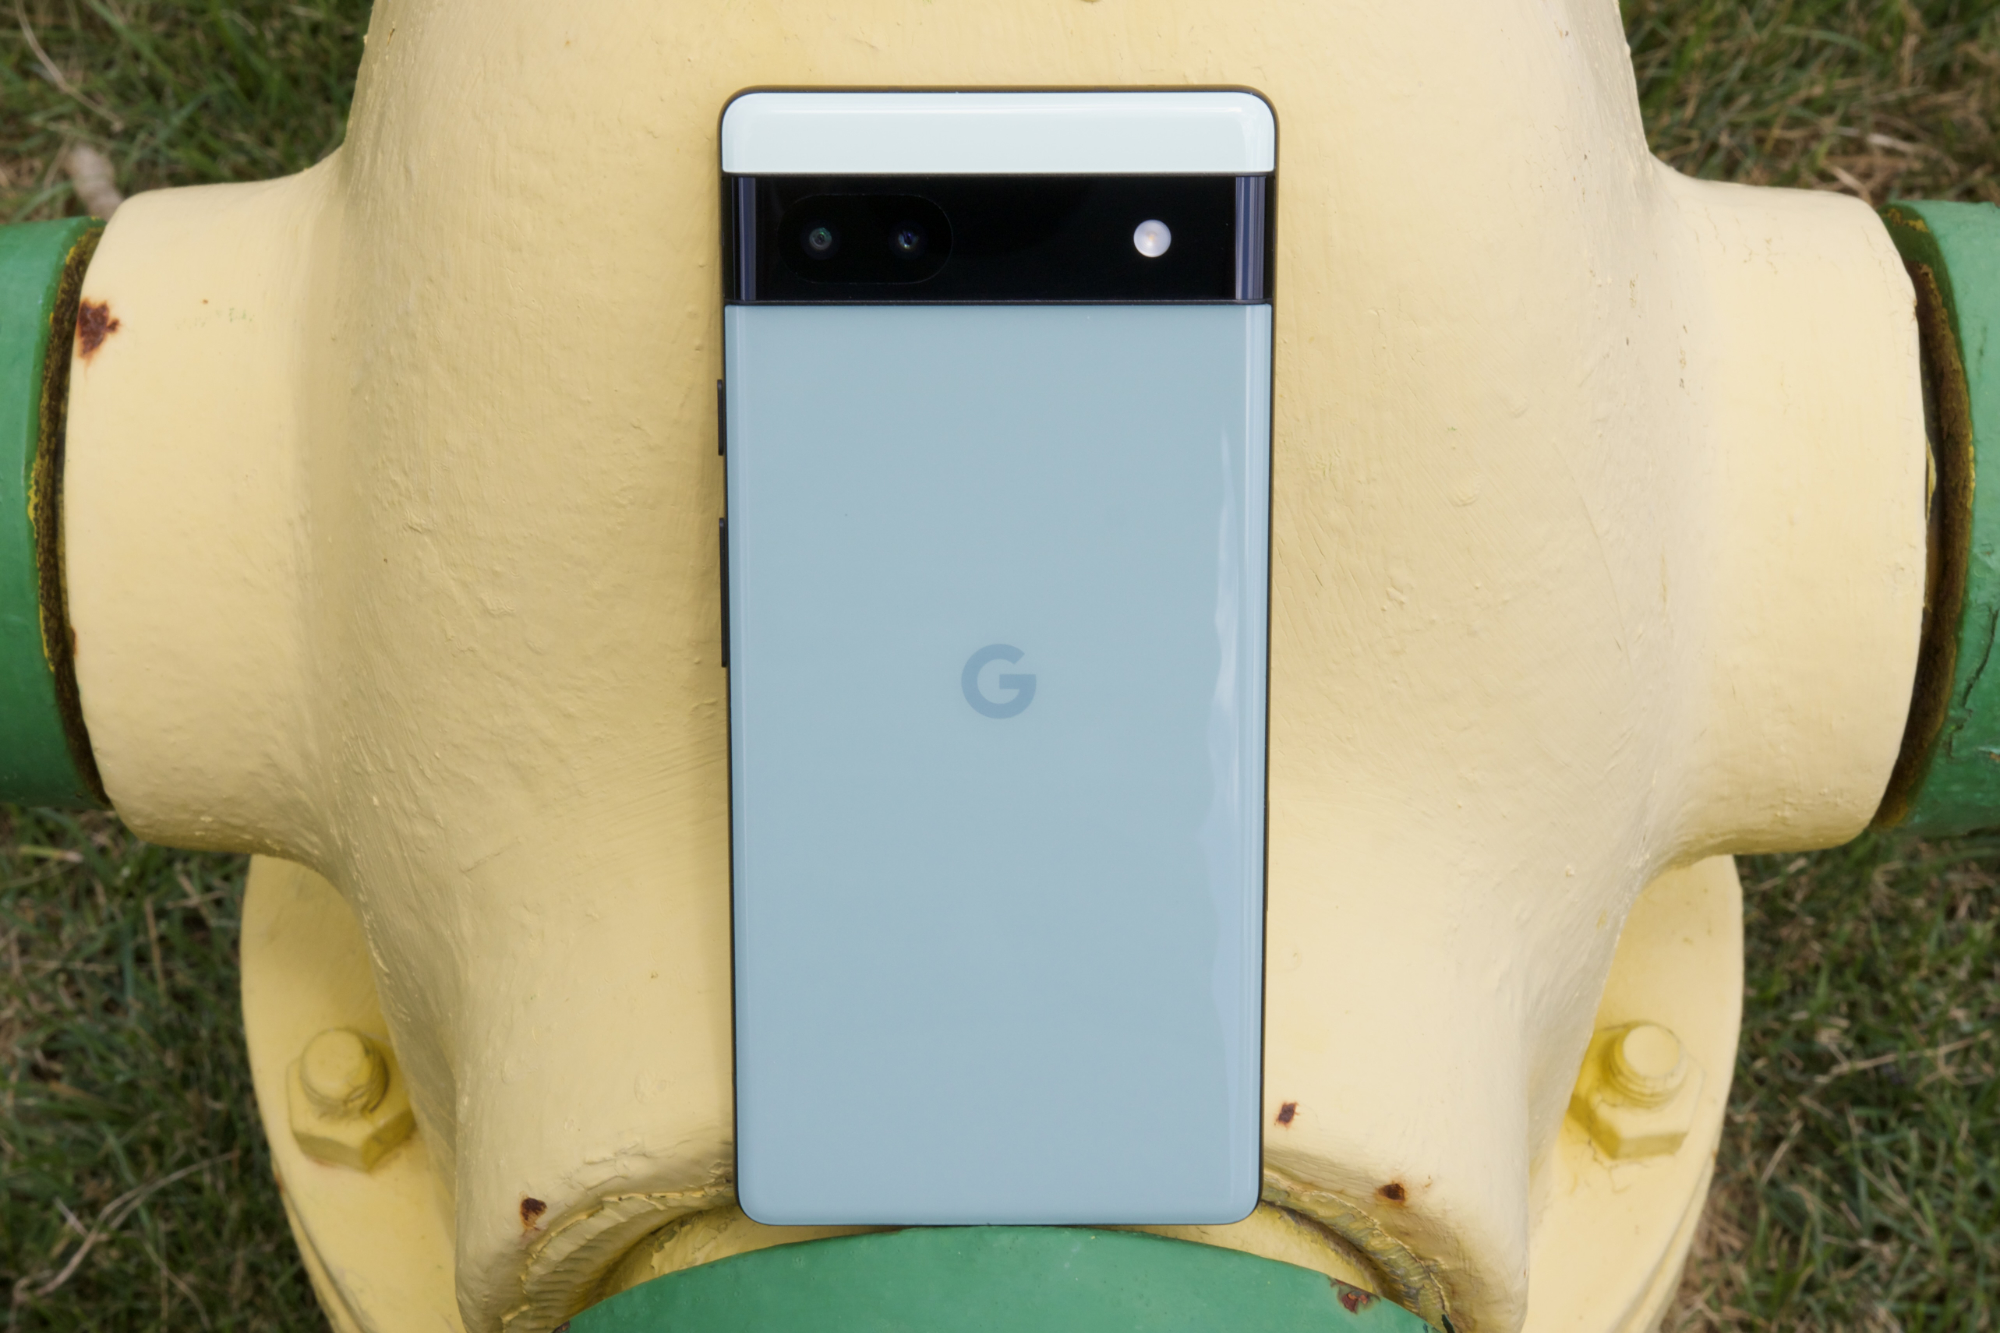 Google Pixel 6a resting against a yellow fire hydrant.